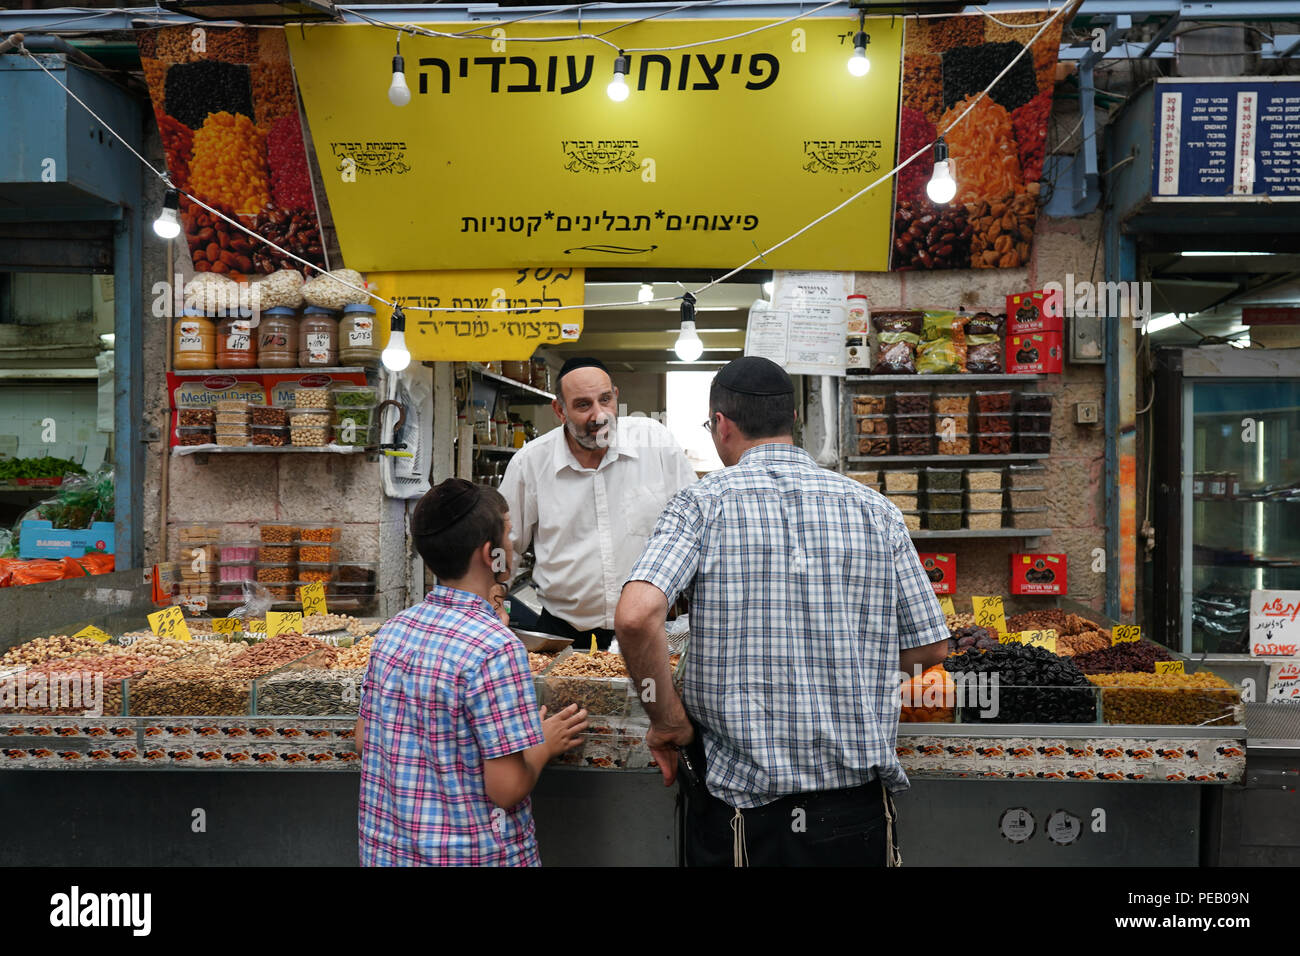 Machane Yehuda market in Jewish west Jerusalem. From a series of travel photos taken in Jerusalem and nearby areas. Photo date: Monday, July 30, 2018. Stock Photo